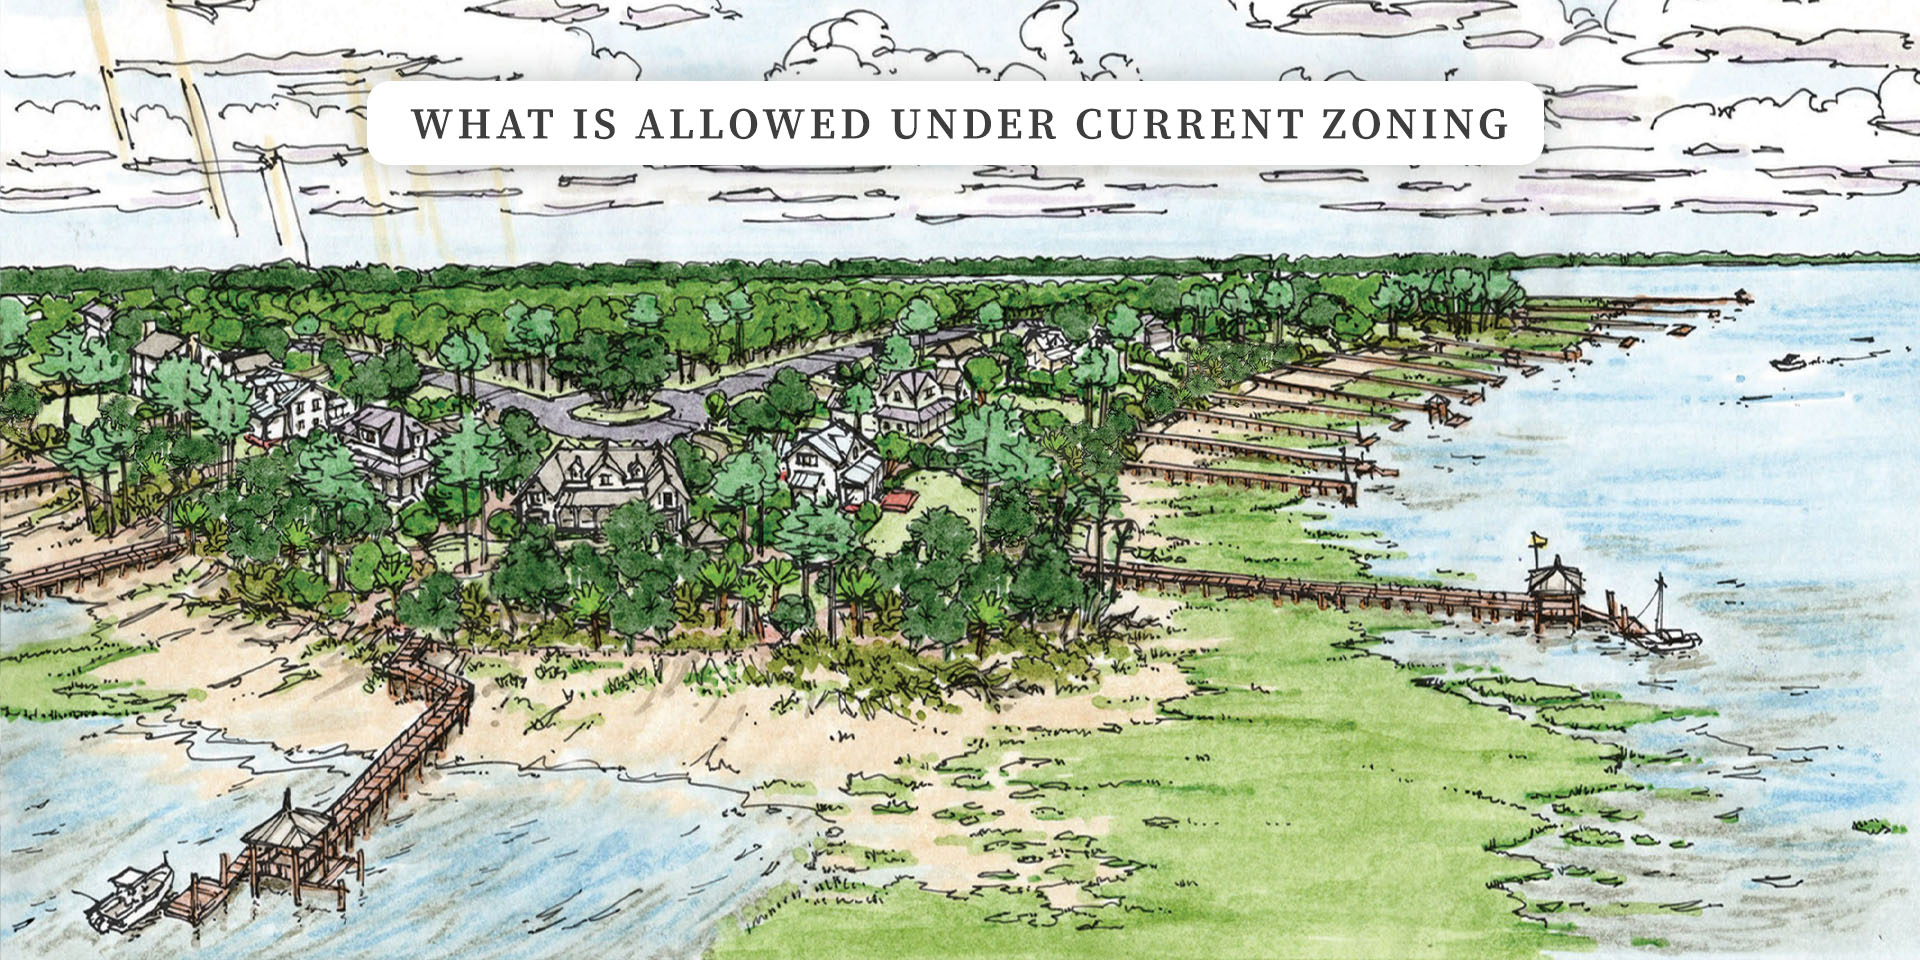 Village Creek at Morgan River: What Is Allowed Under Current Zoning